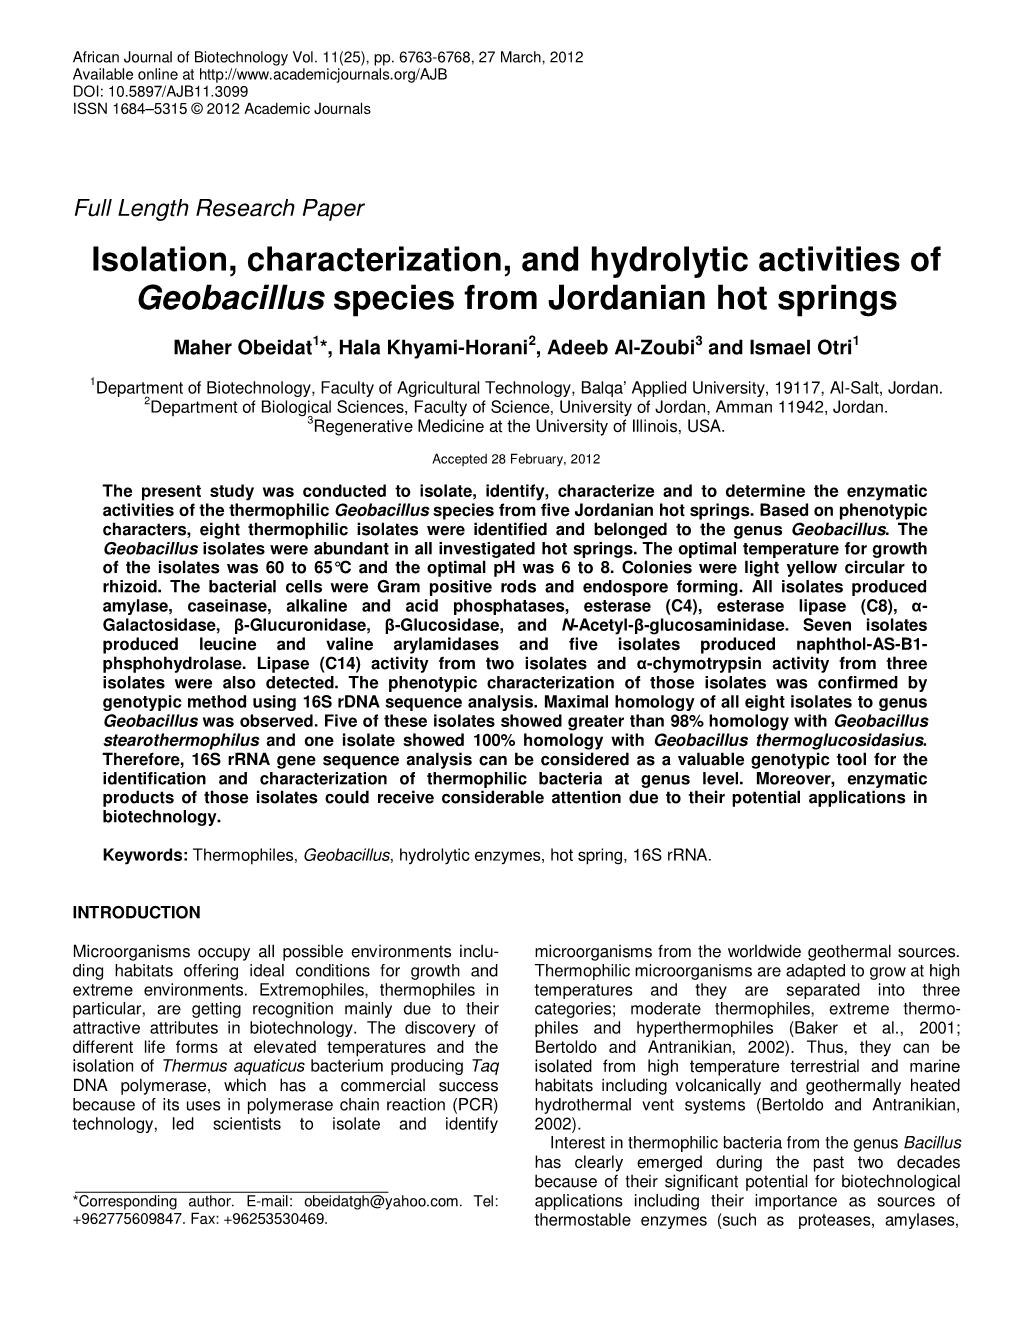 Isolation, Characterization, and Hydrolytic Activities of Geobacillus Species from Jordanian Hot Springs